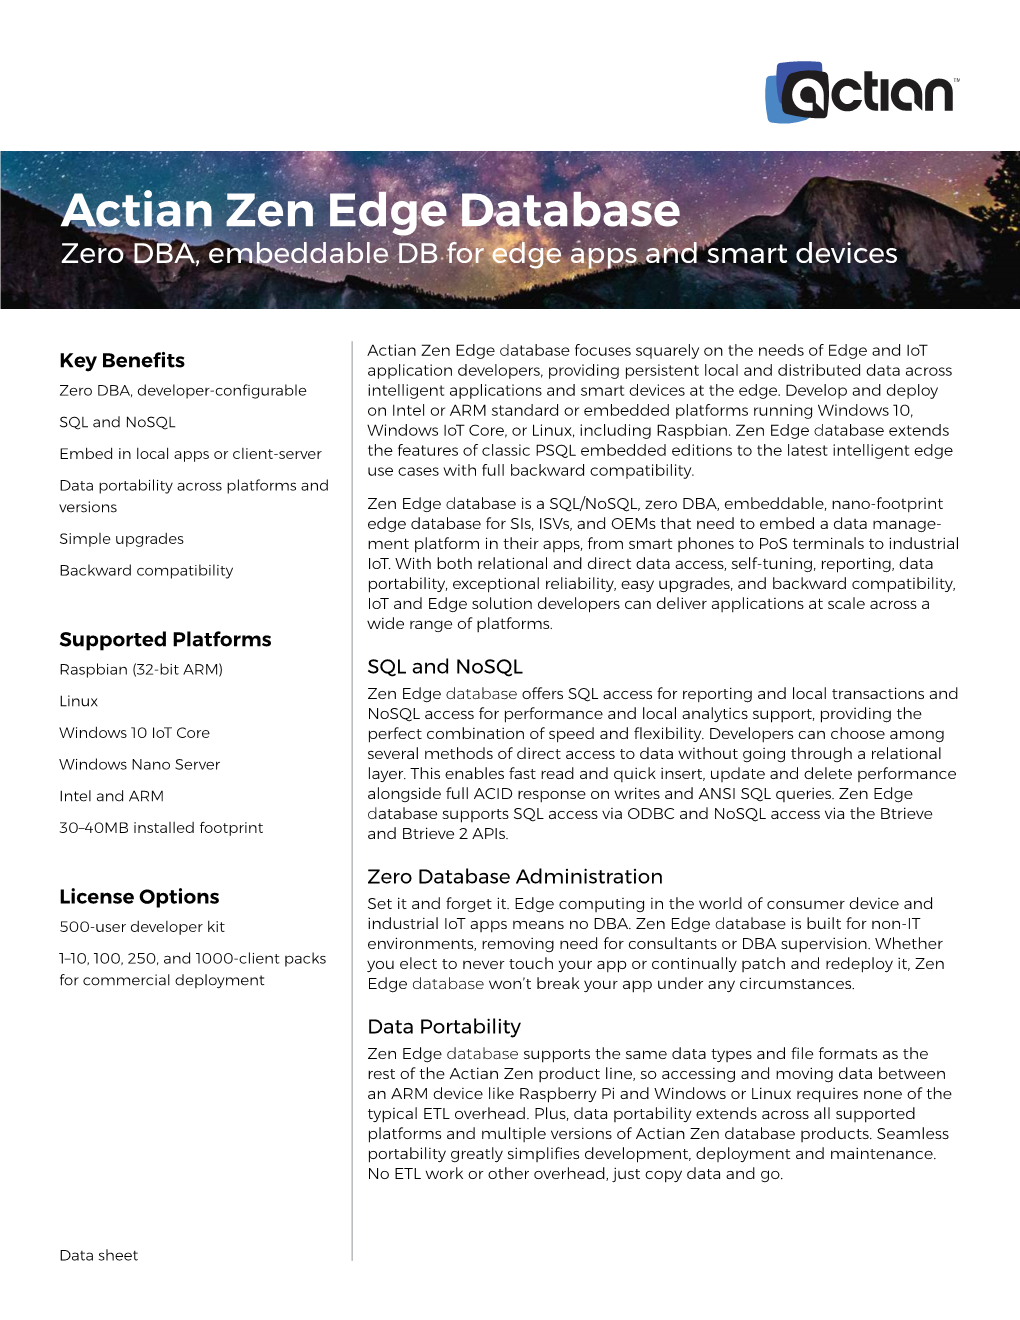 Actian Zen Edge Database Zero DBA, Embeddable DB for Edge Apps and Smart Devices